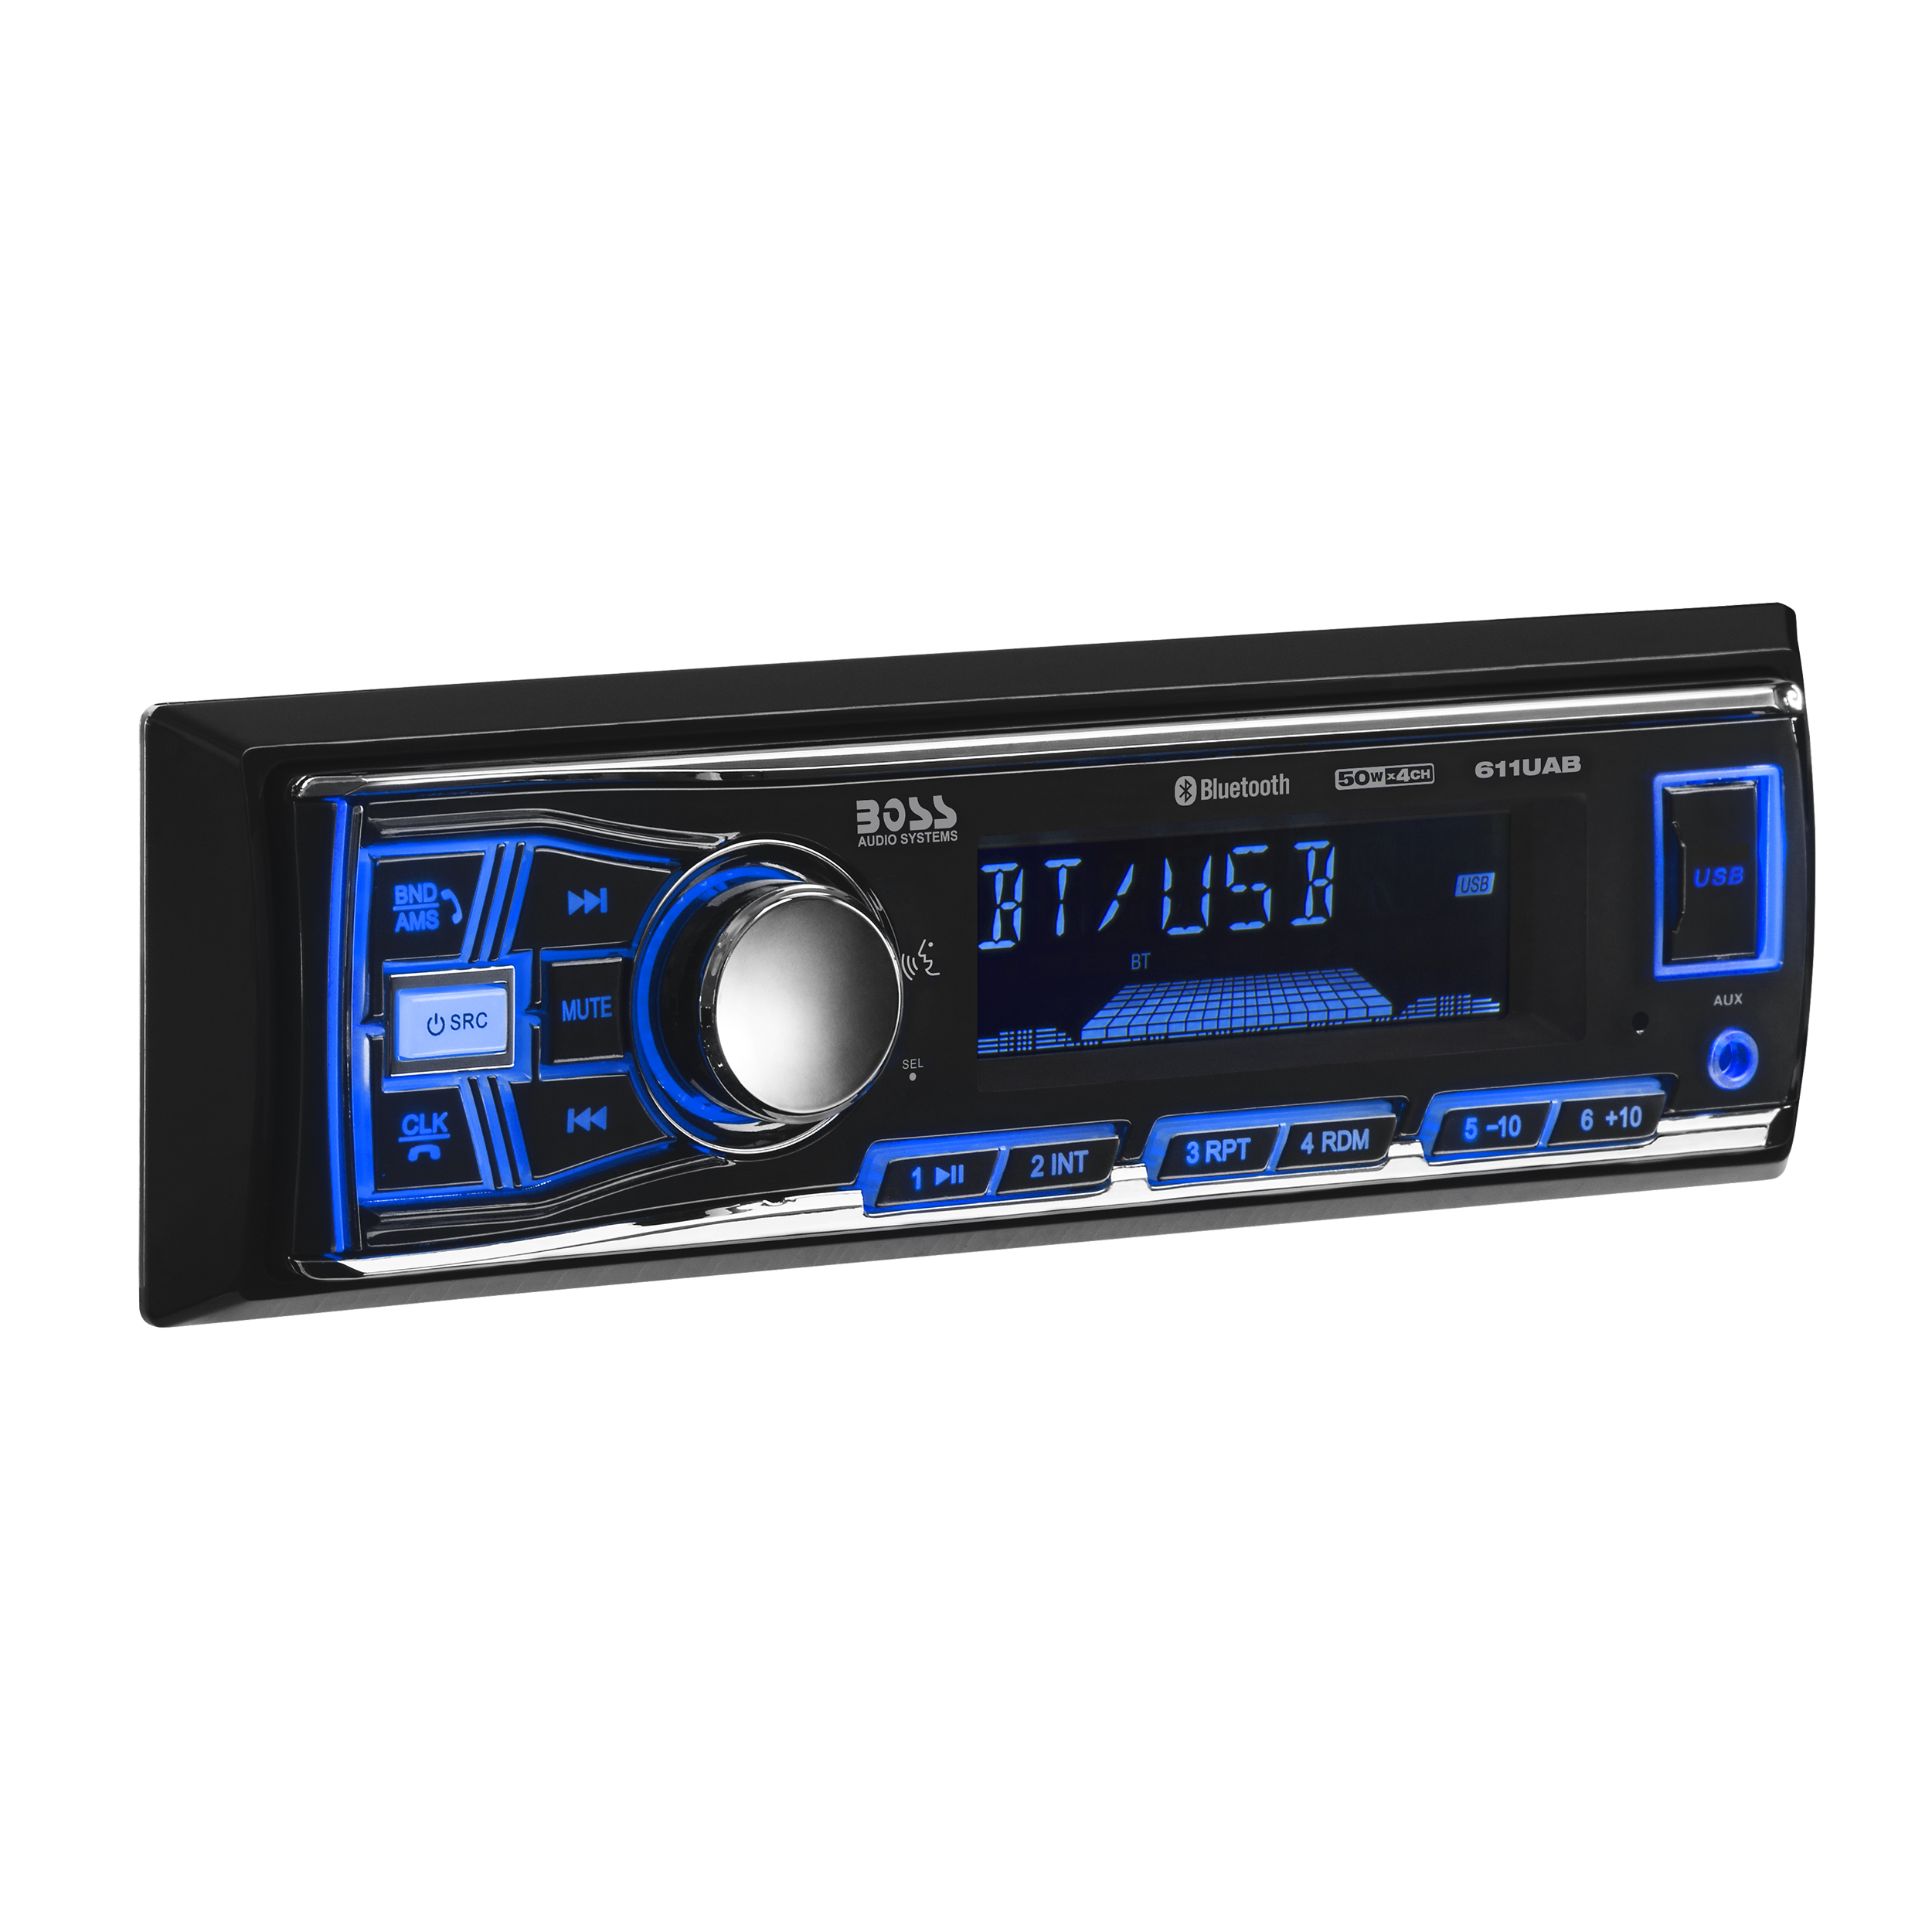 BOSS Audio Systems 616UAB Car Stereo - Single Din, Bluetooth, No CD DVD  Player, AM/FM Radio Receiver, Wireless Remote Control, MP3, USB, Aux-in